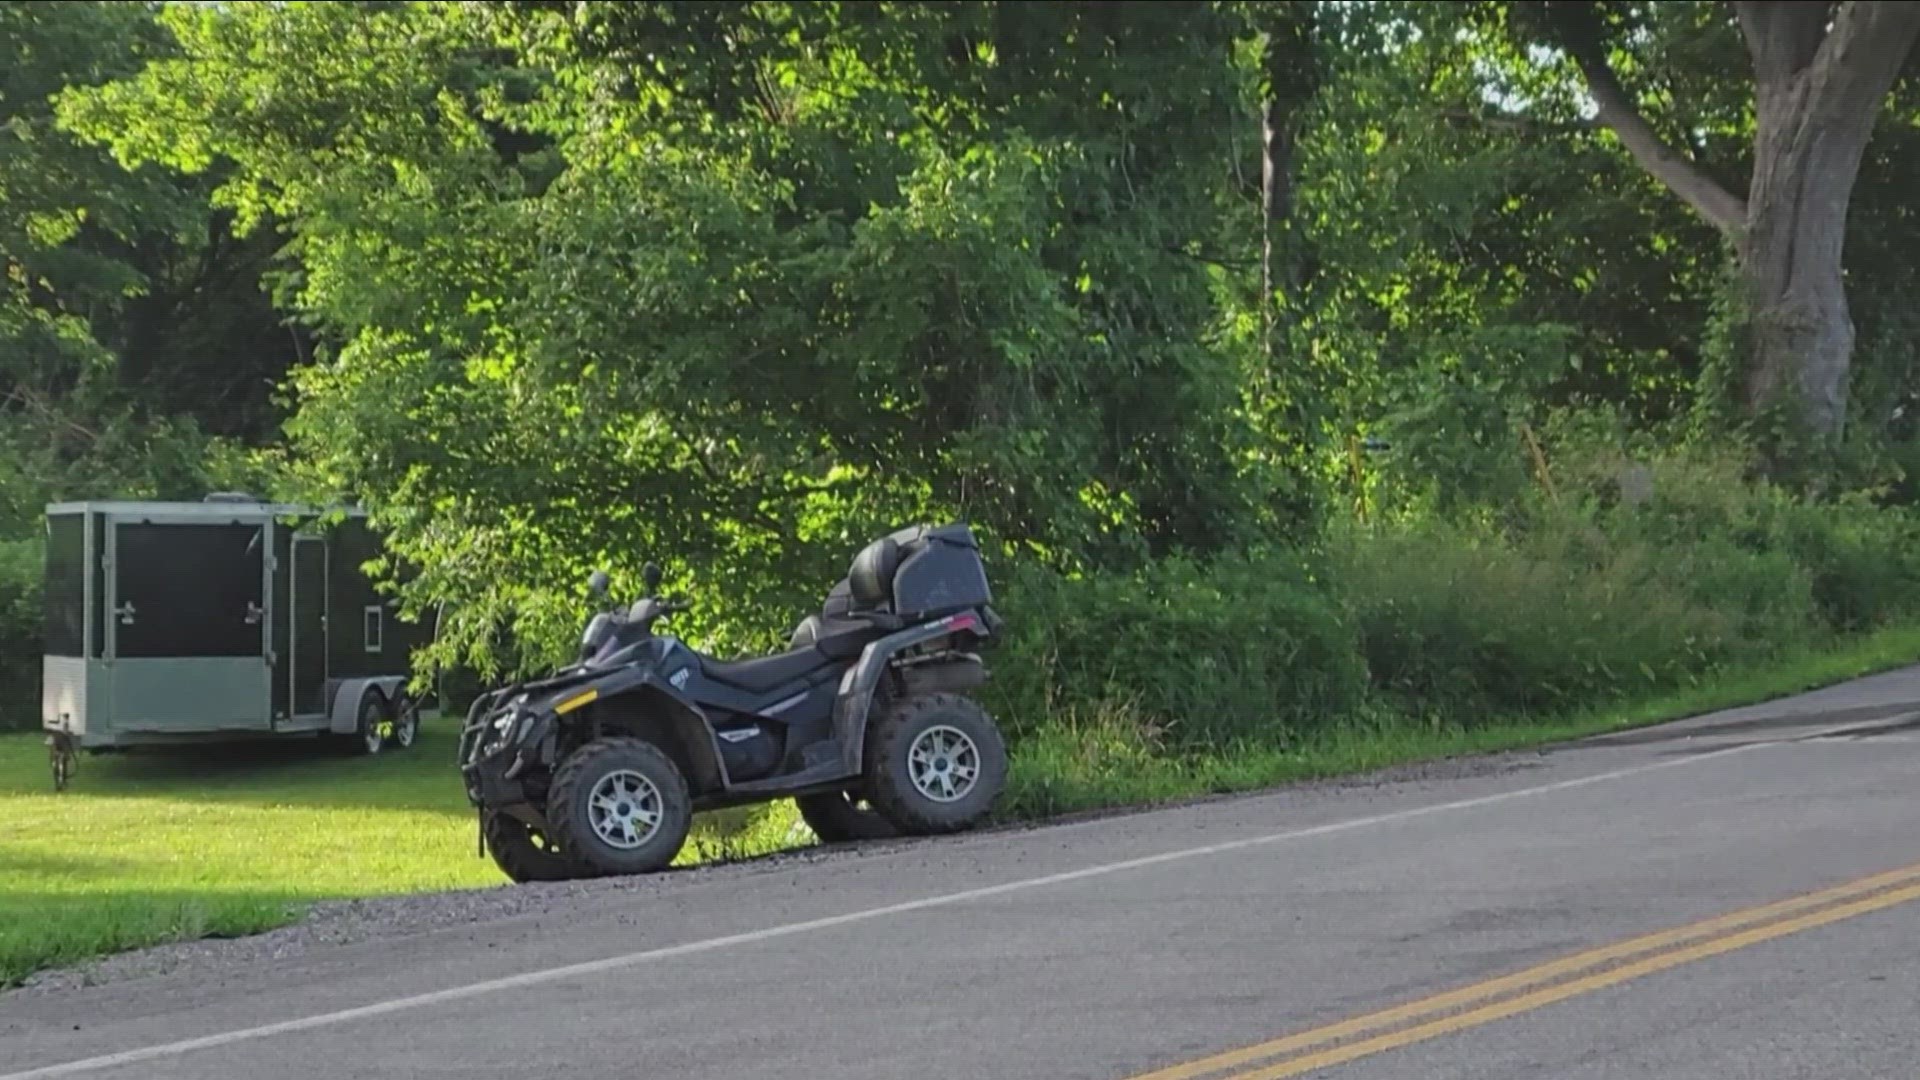 state police have confirmed that a 60 year old man in Alabama New York has died after an ATV crash yesterday.